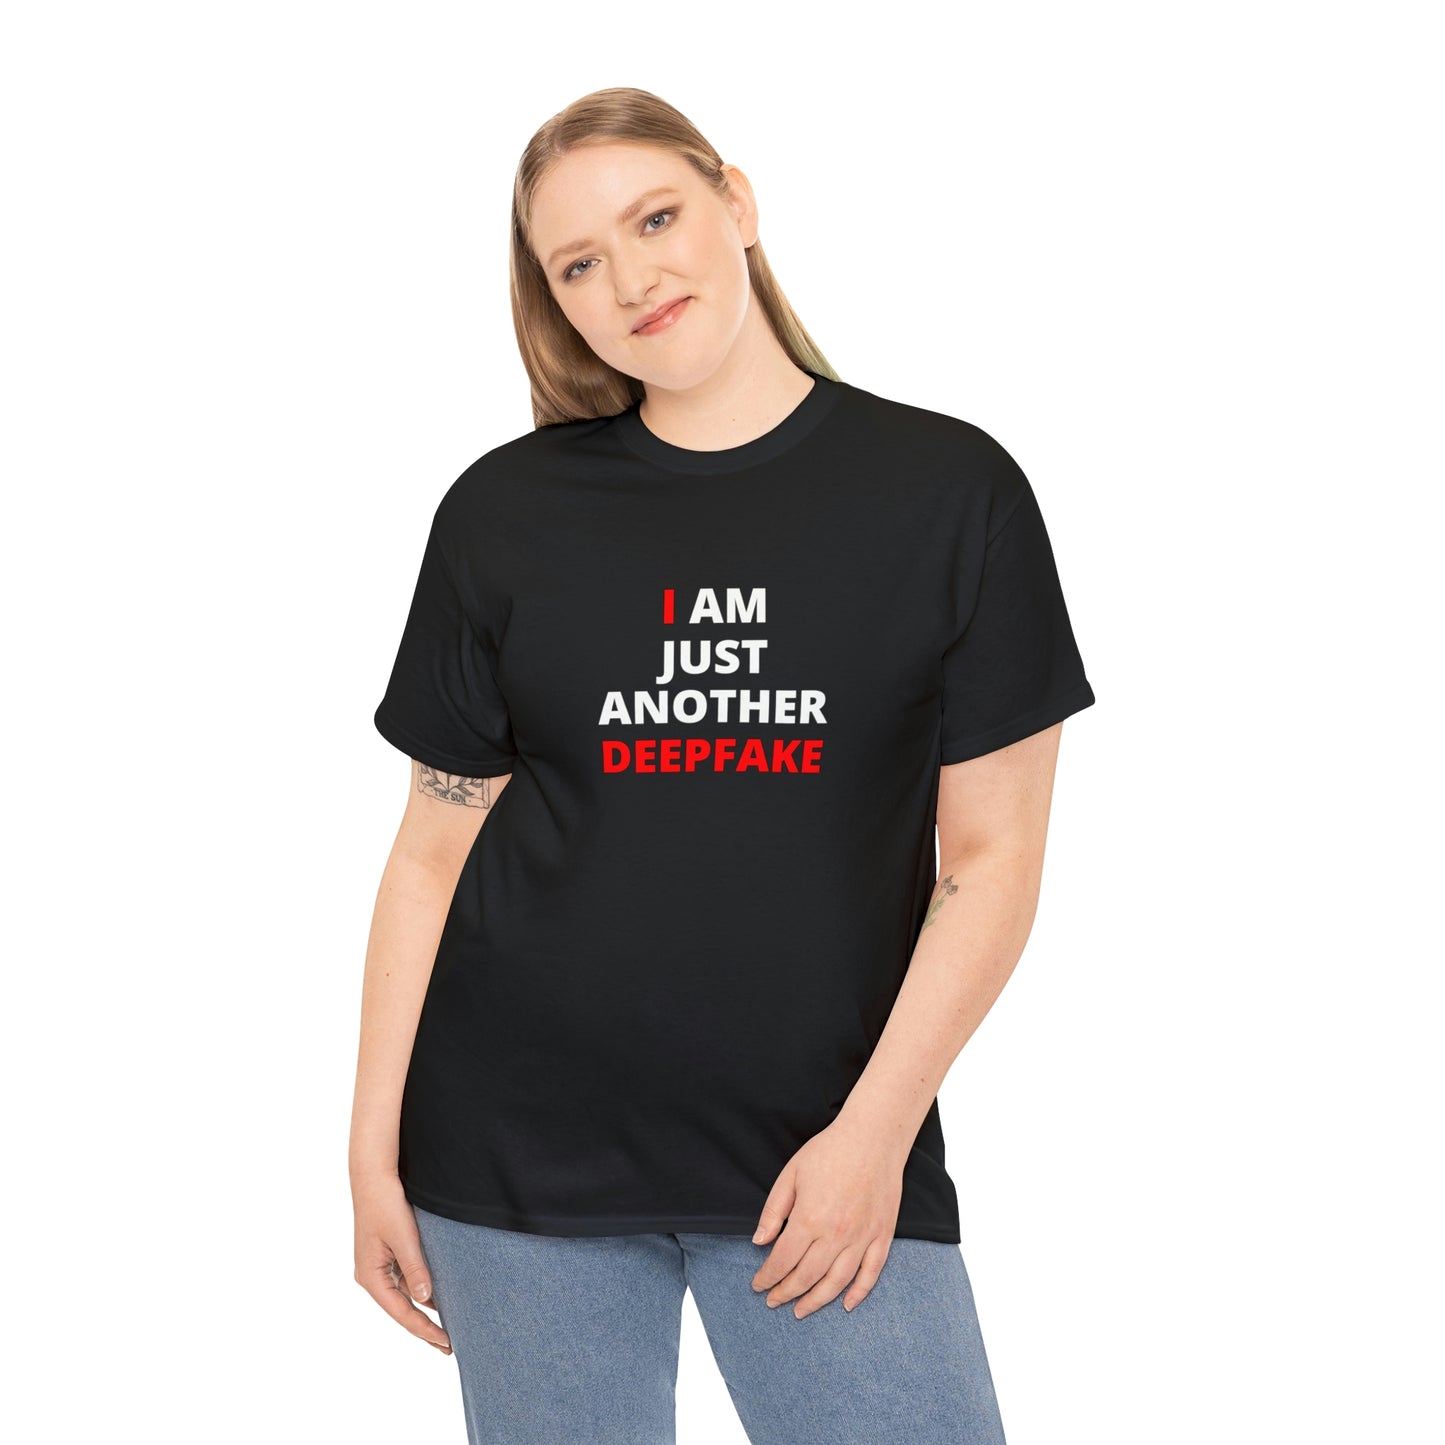 "I AM JUST ANOTHER DEEPFAKE" Blk or Wte Unisex Heavy Cotton Tee